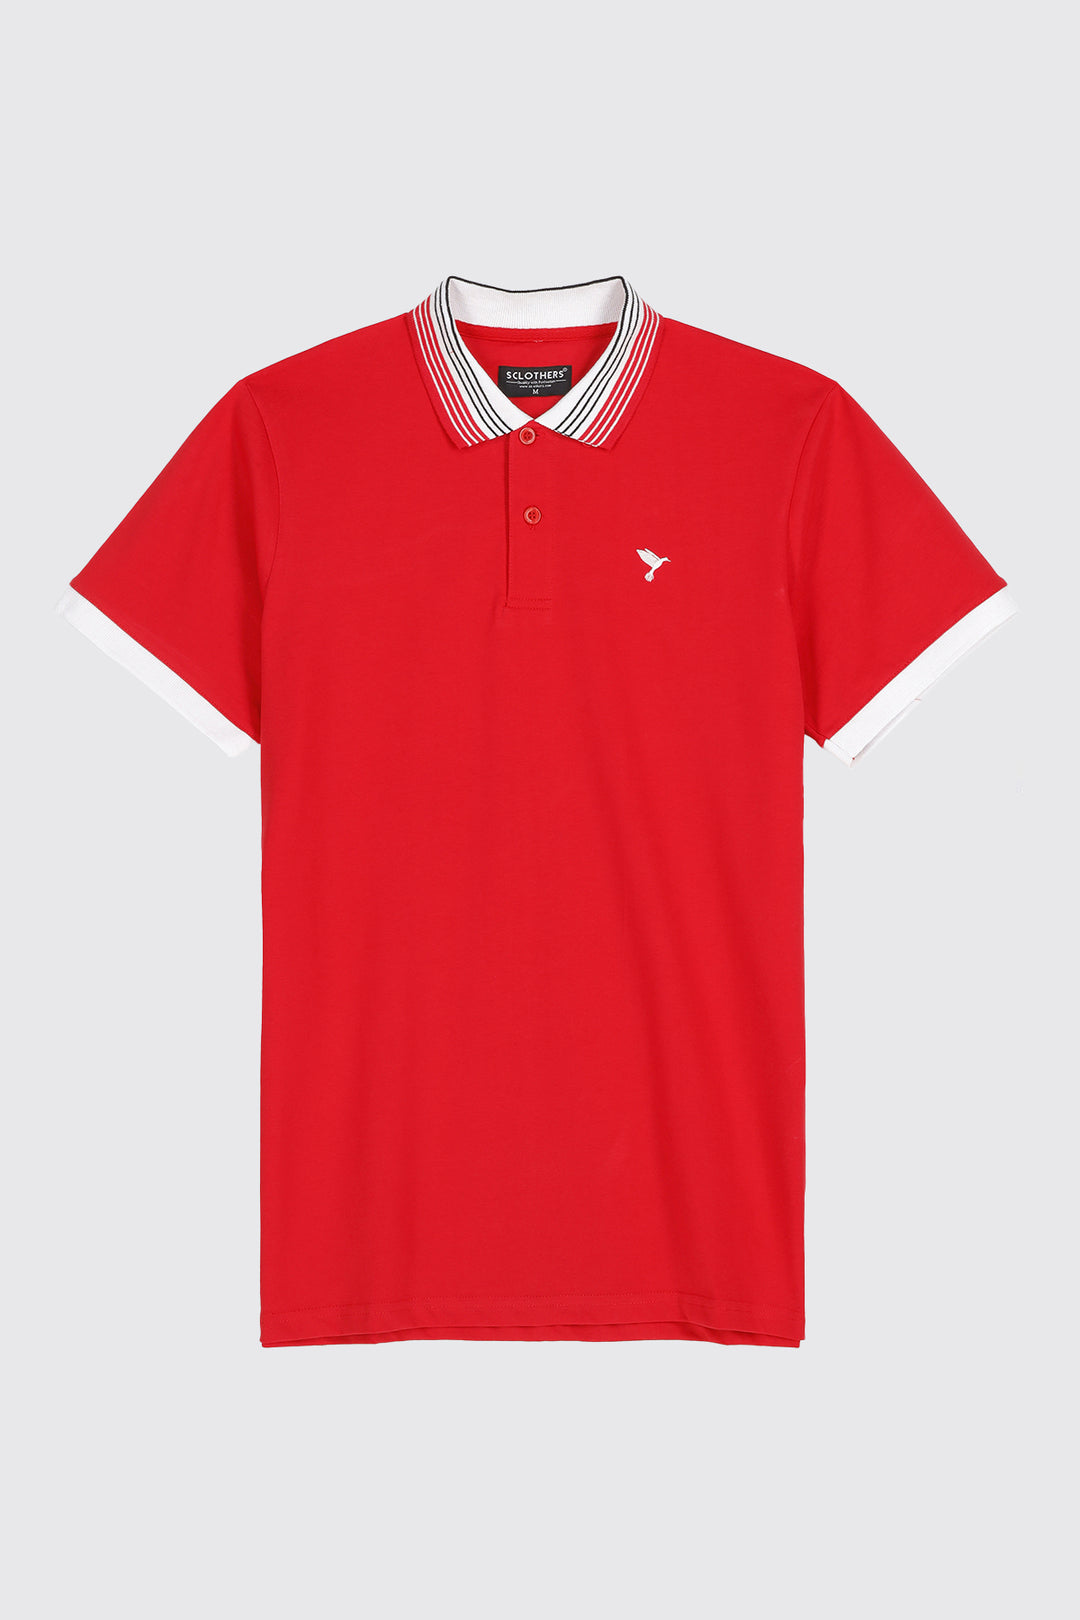 Red Contrast Jacquard Collar Polo Shirt (Plus Size) - A23 - MP0187P